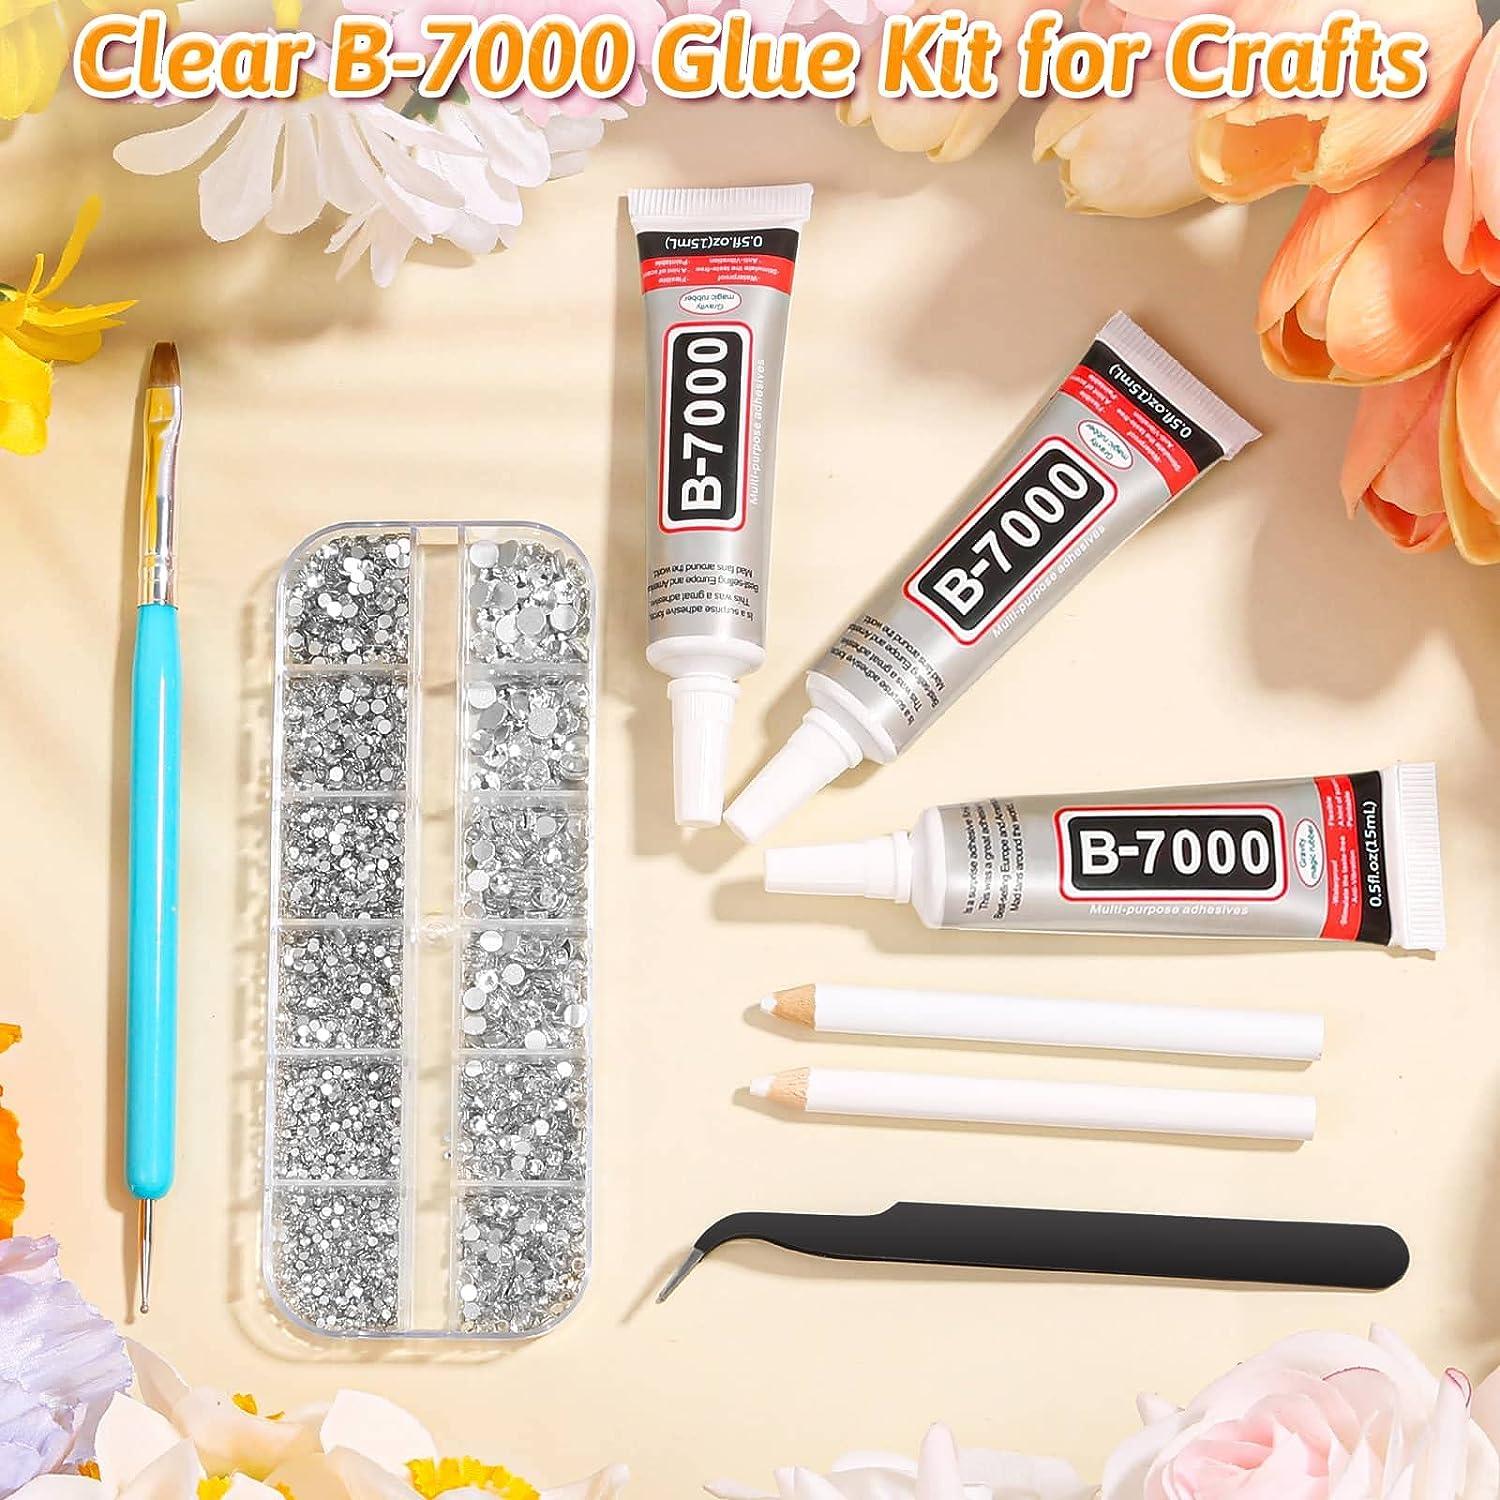 B7000 Rhinestones Clear Glue with Rhinestones for Crafts, 3600Pcs Face Gems  Clear Rhinestones Kit 6 Sizes (1.5-6 mm) with Fabric Glue for Clothes Shoes  Nail Art Face Gems Jewelry